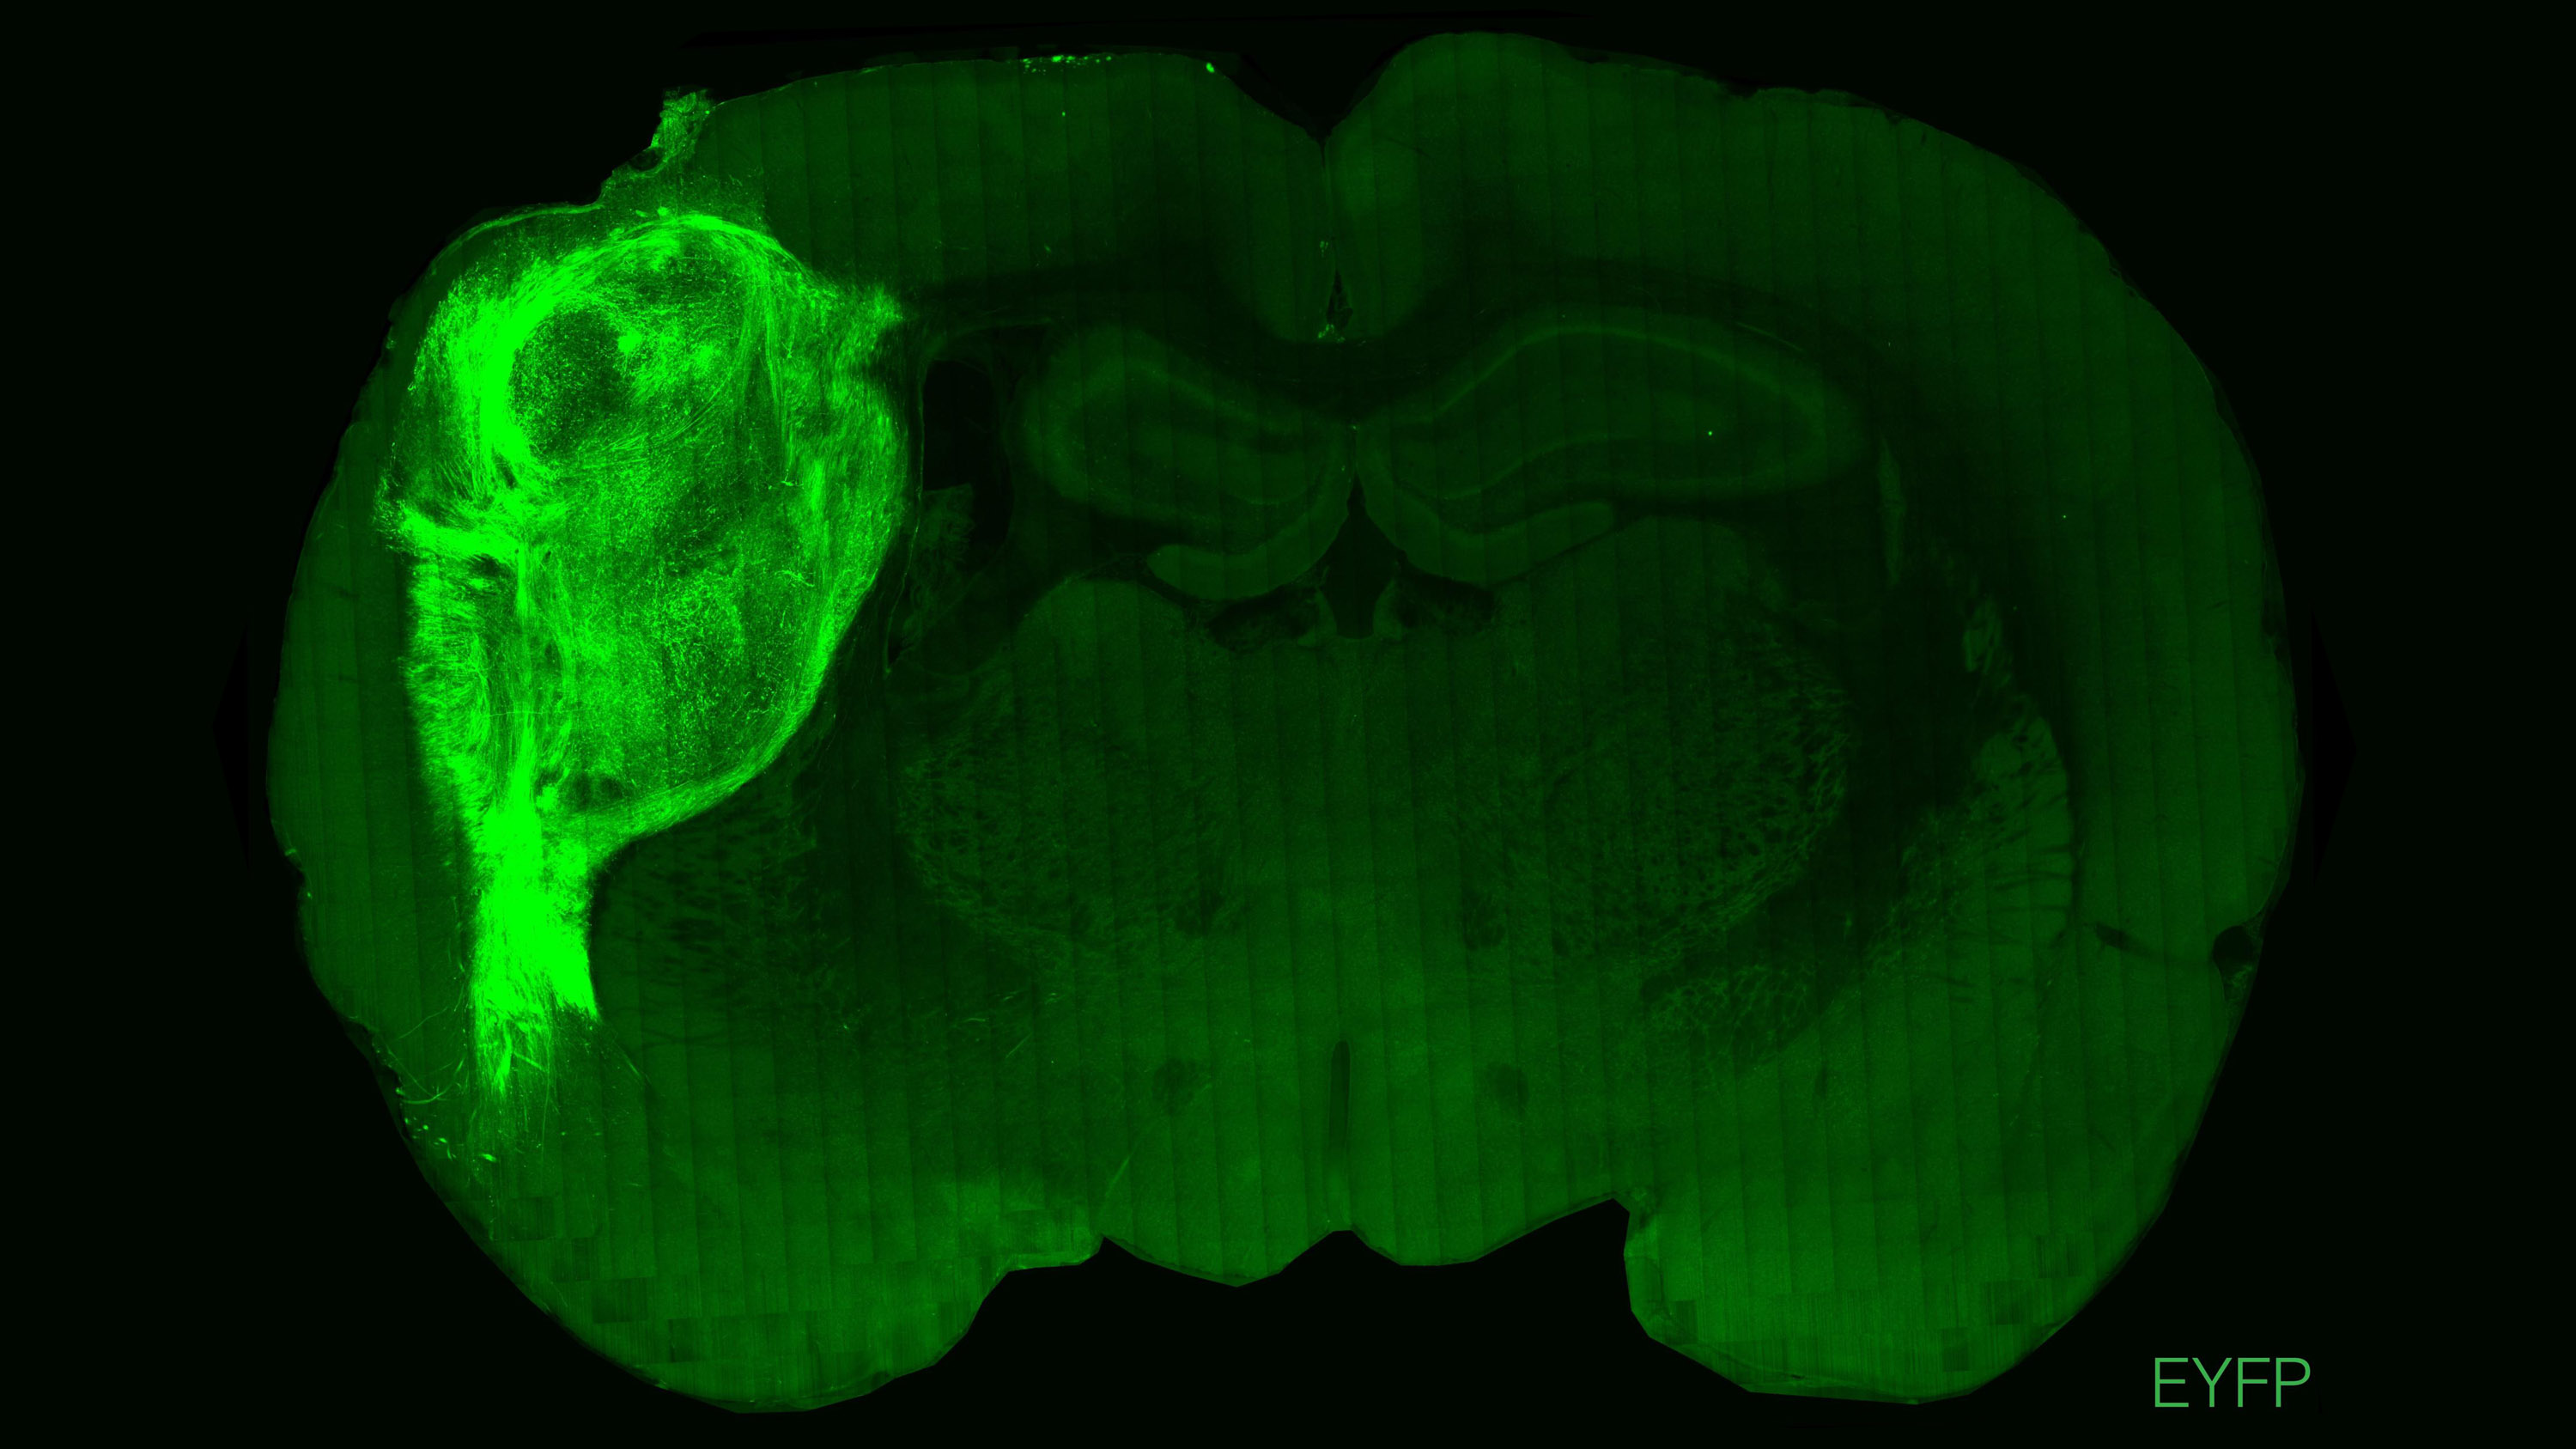 Transplanted human organoid labeled with fluorescent protein in a rat brain